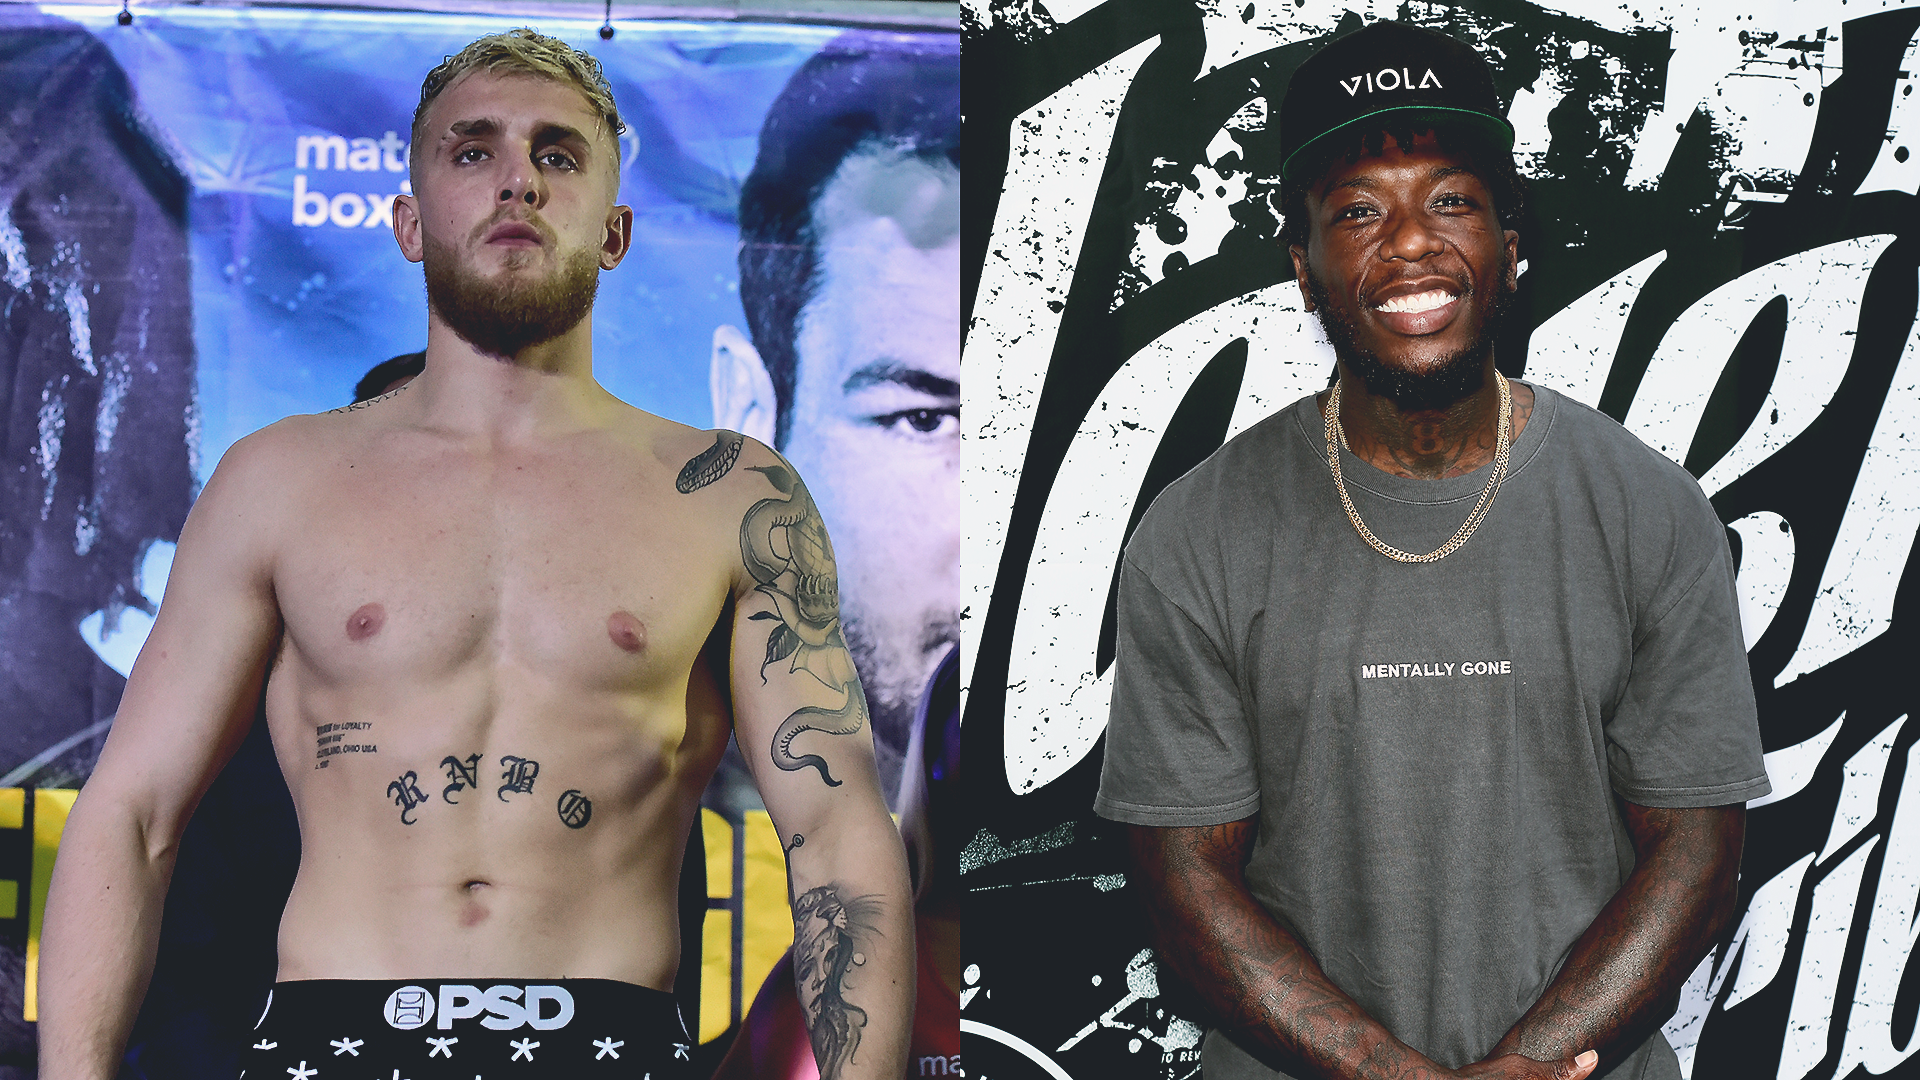   Why the fight between Jake Paul and Nate Robinson?  A random interview set up an unlikely boxing match

